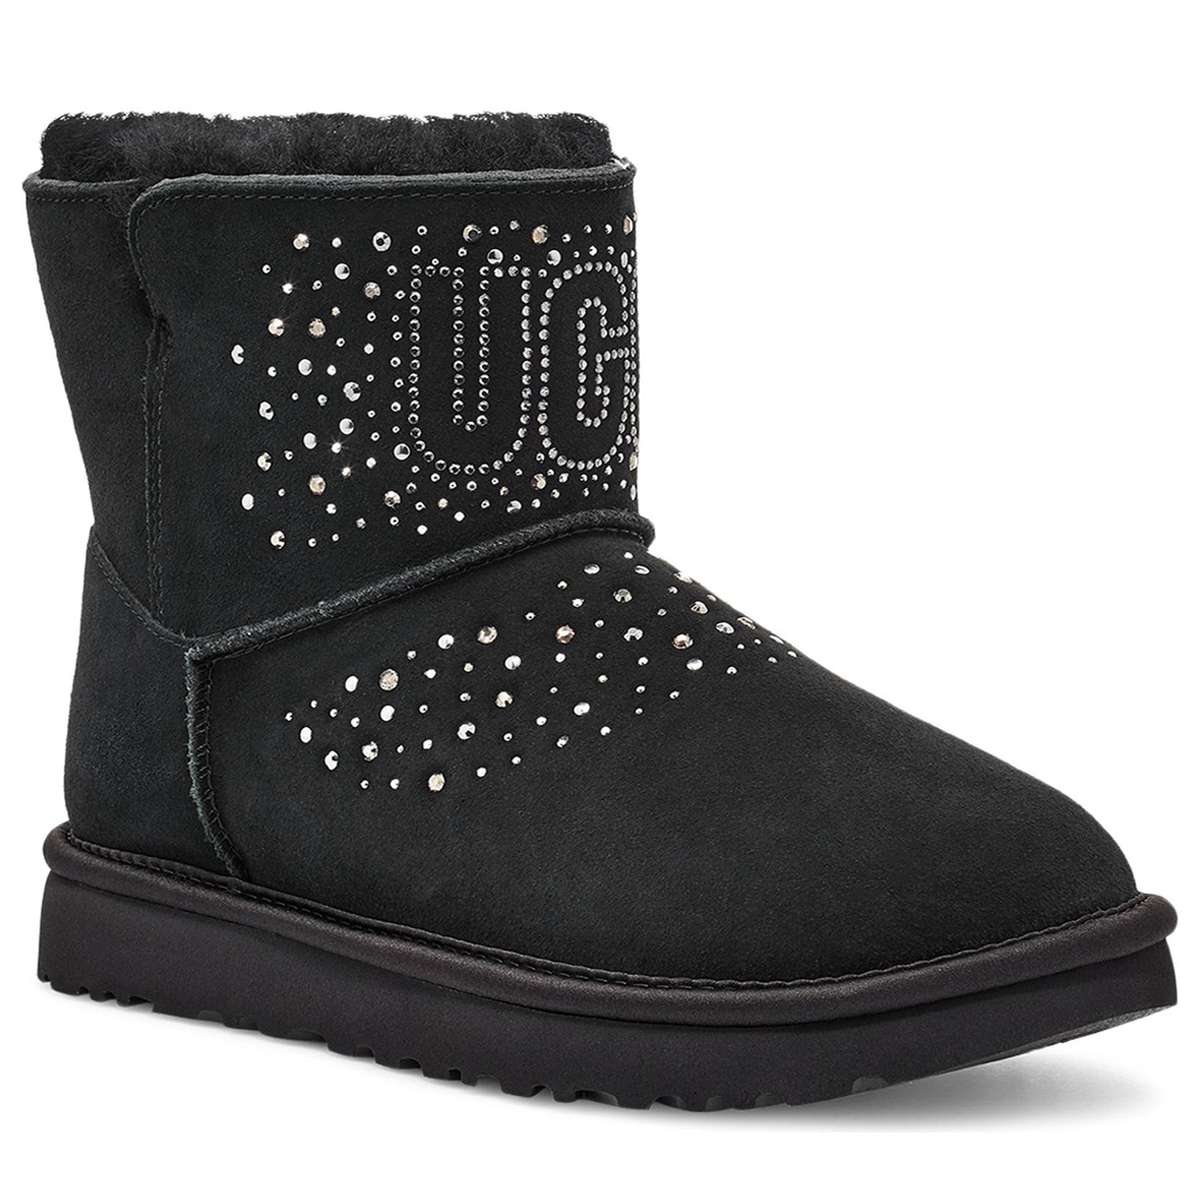 Uggs at Nordstrom